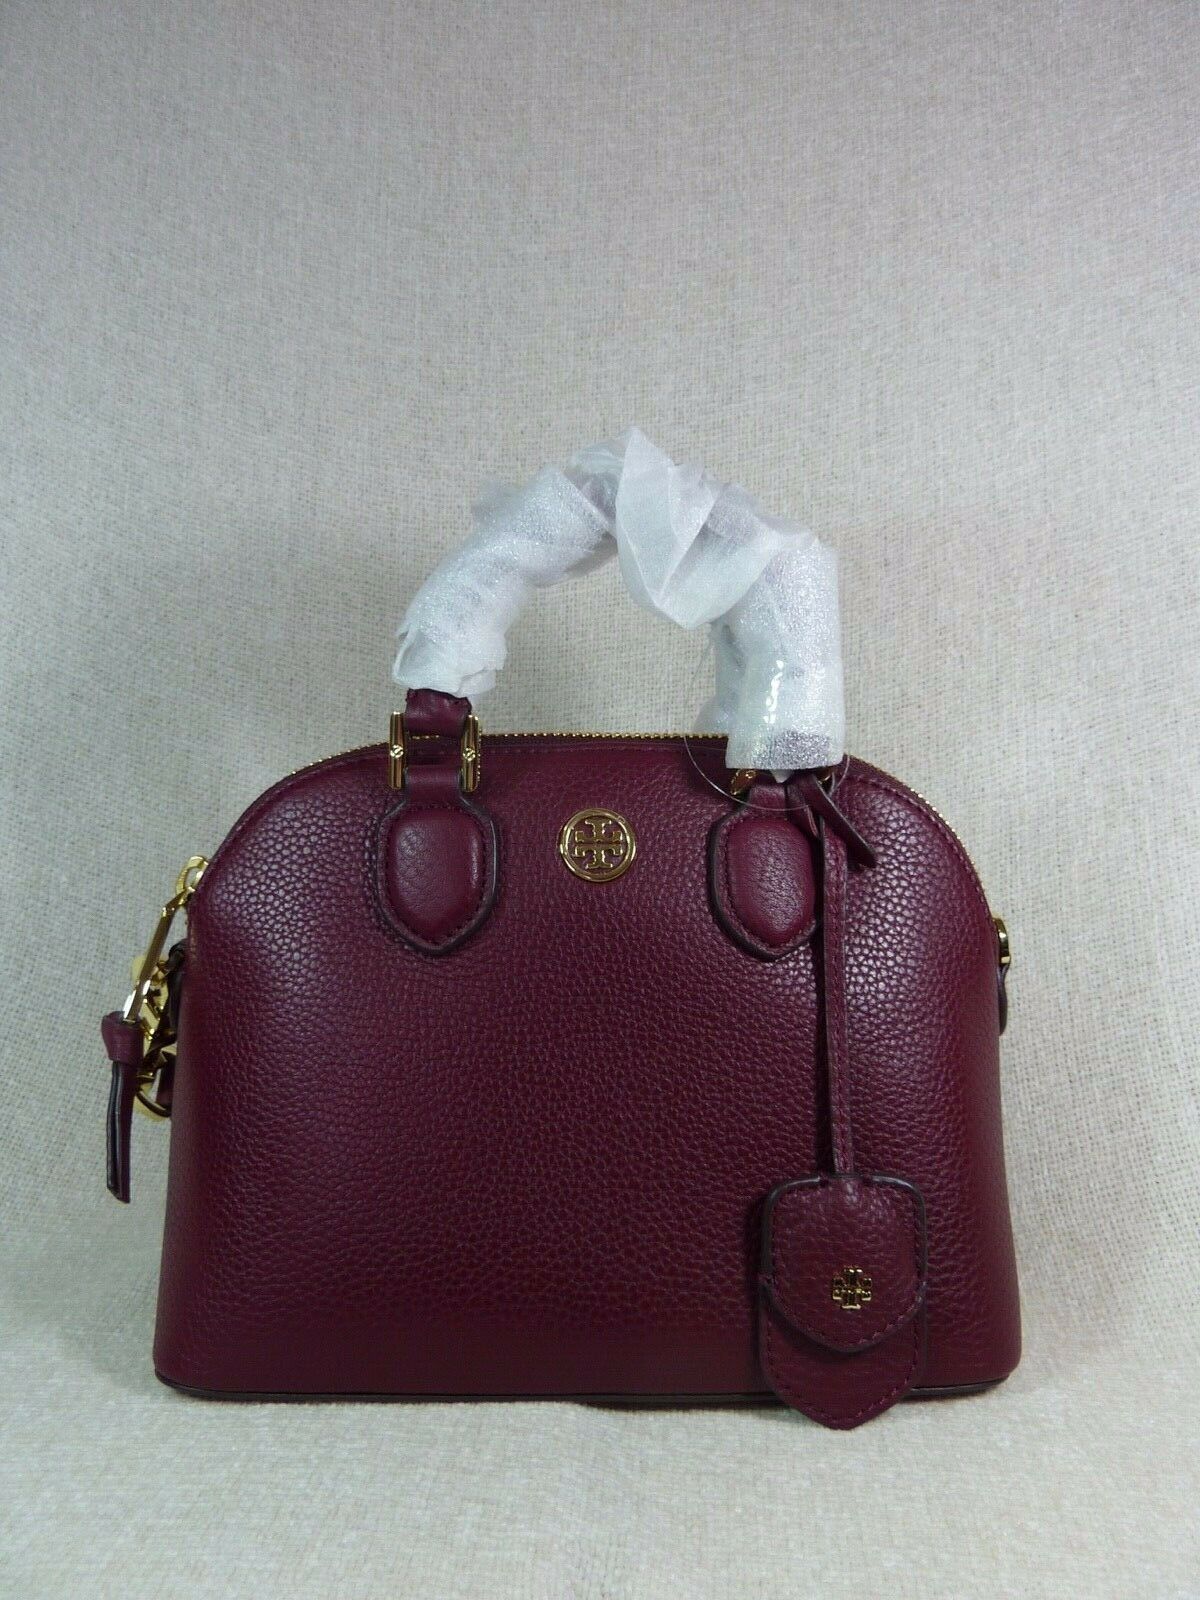 Primary image for Tory Burch Burgundy Leather Mini Robinson Dome Cross Body Bag/Tote  - $395